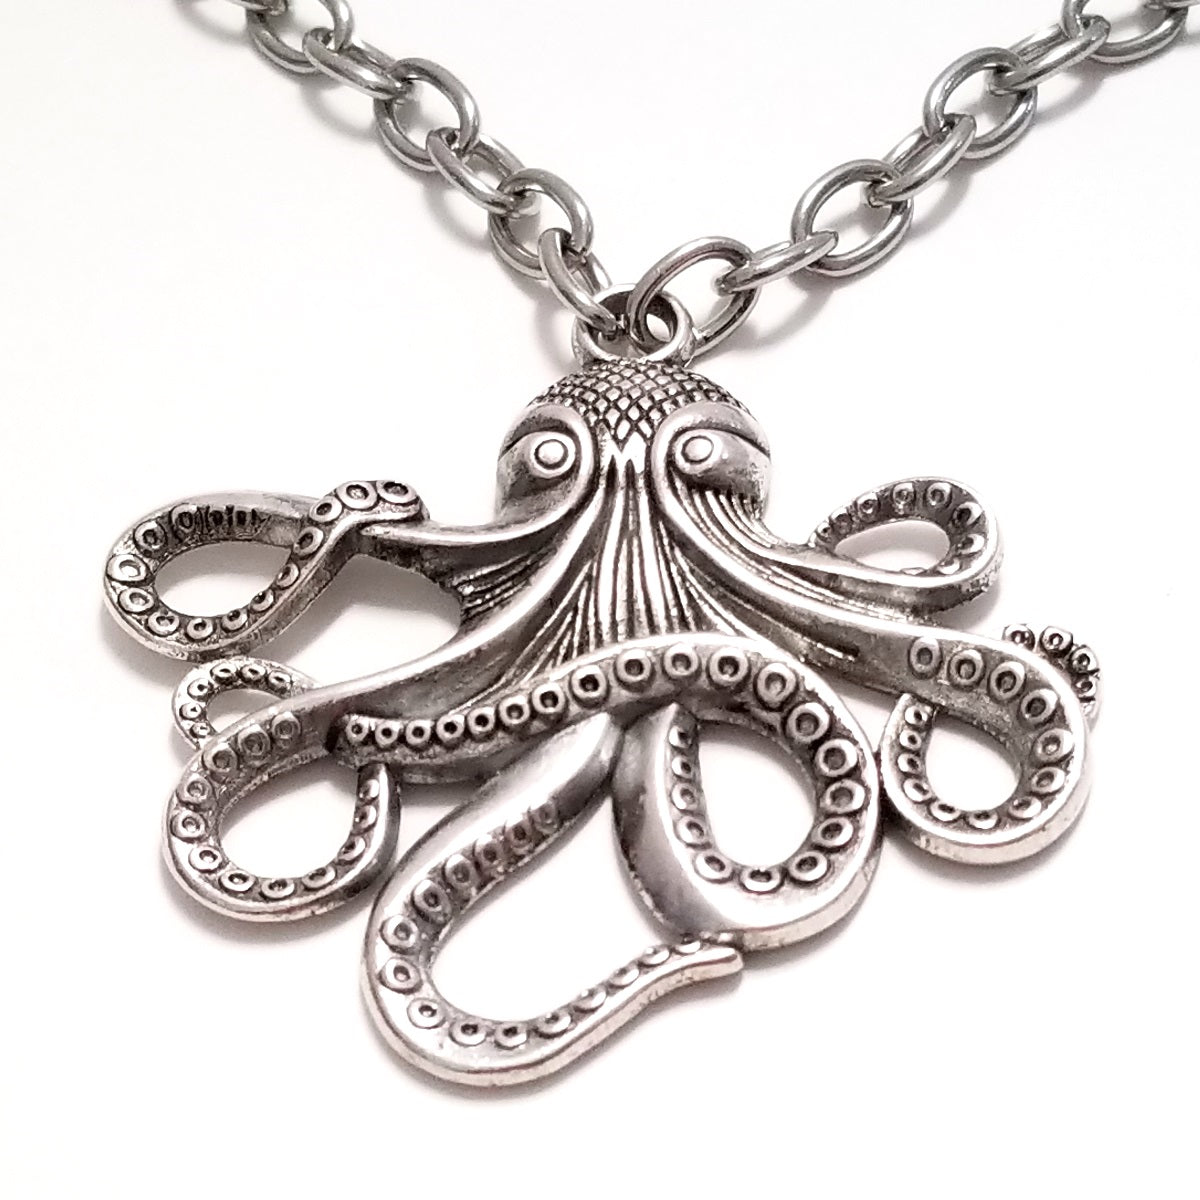 Anchor Focal Pendant Sterling Silver Jewelry Making Supplies 